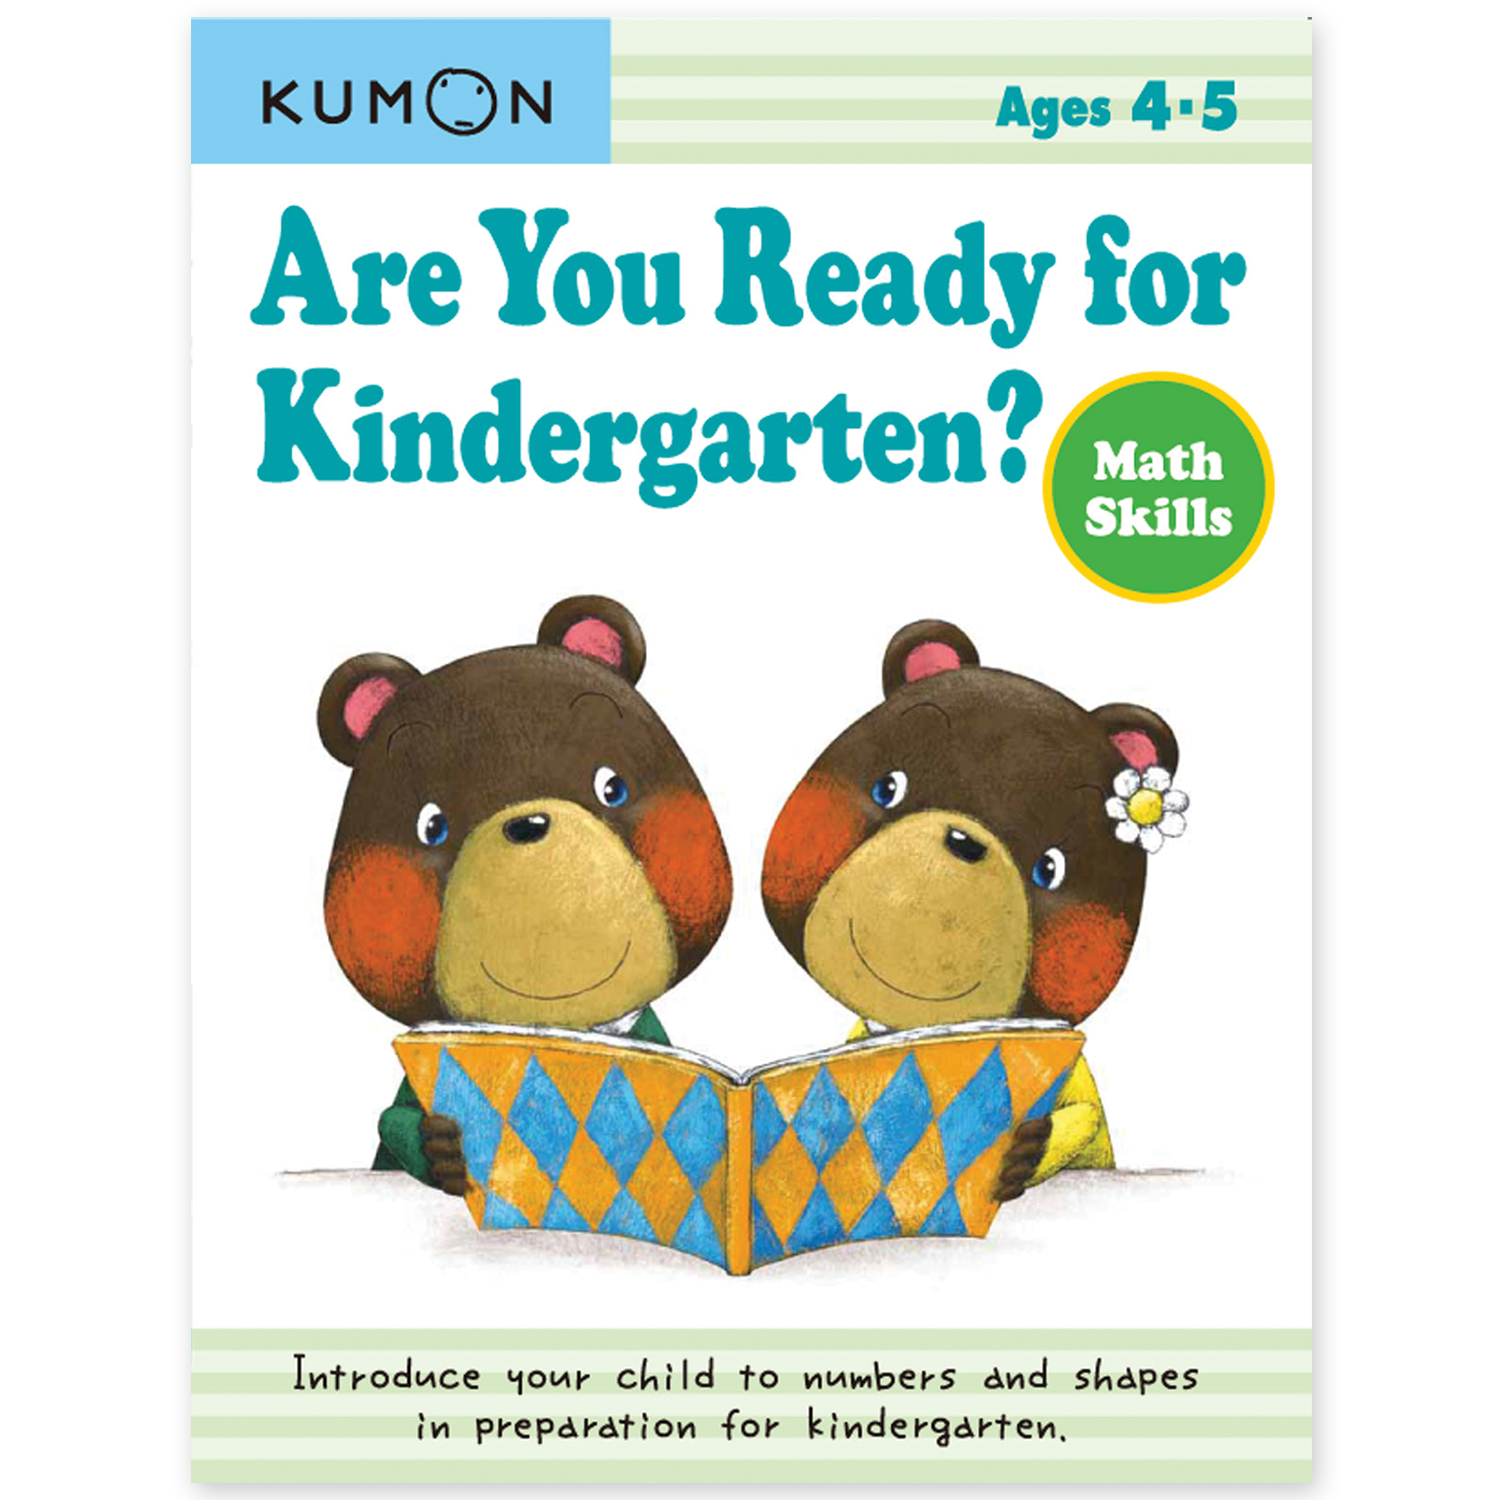 are you ready for kindergarten? math skills